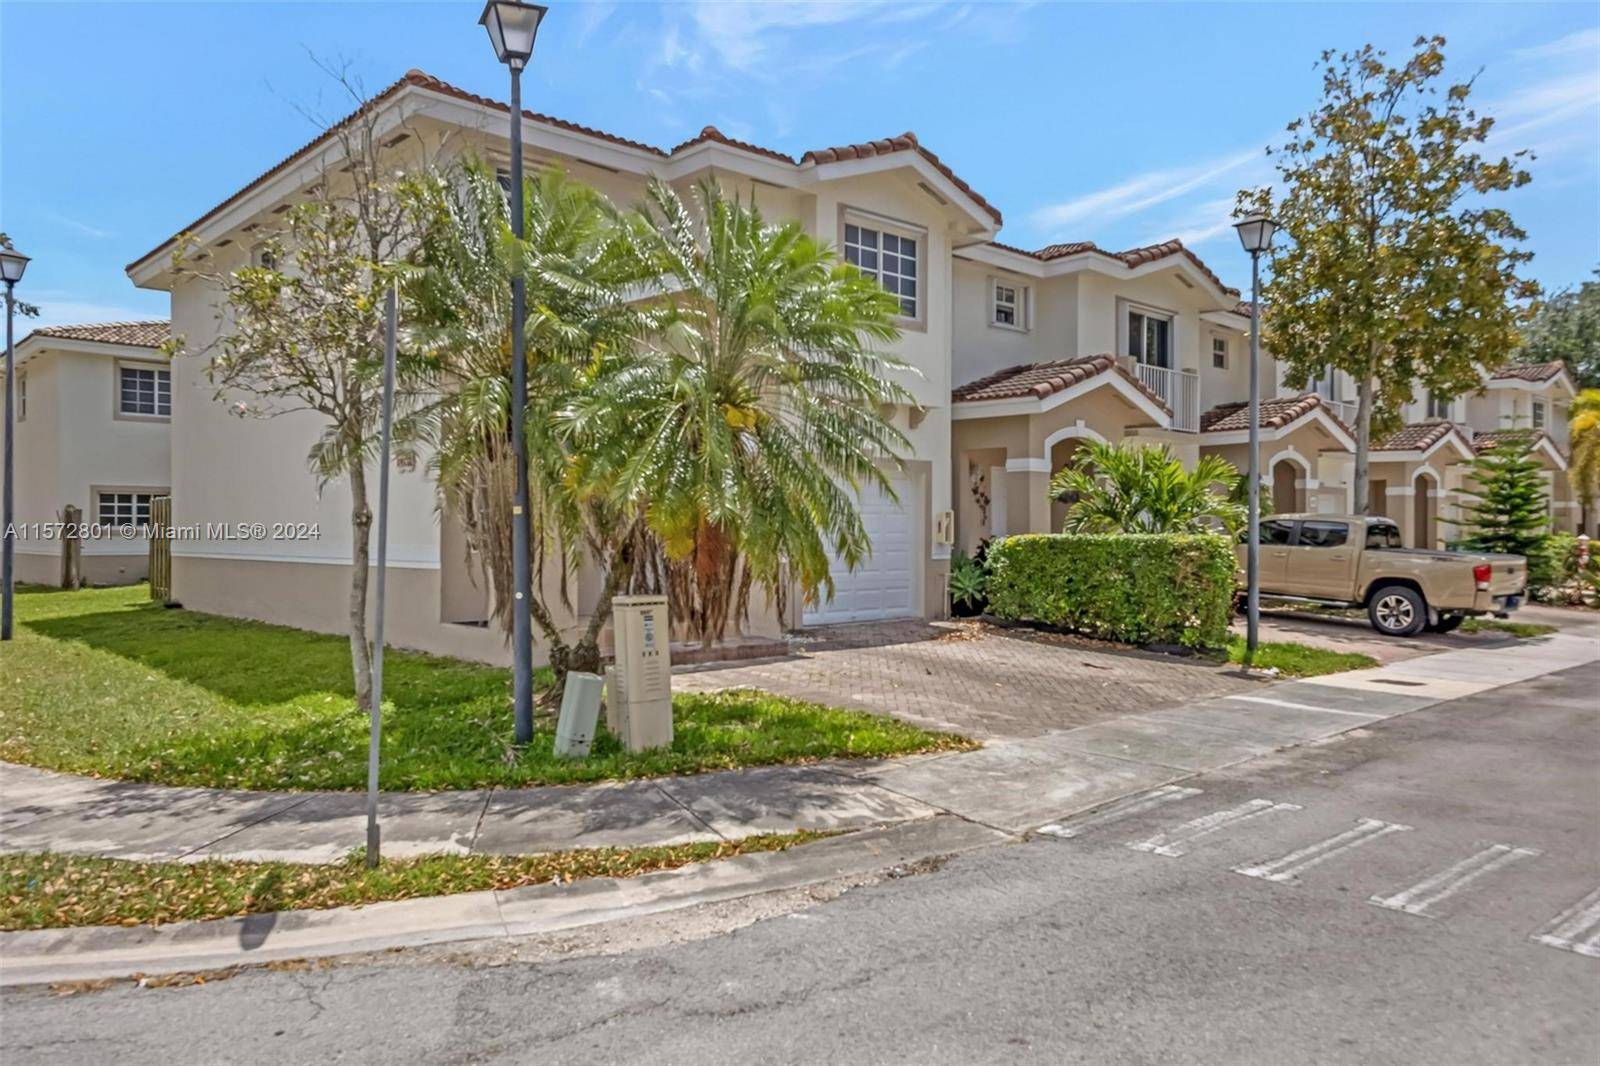 This 3 bedroom 2. 5 bathroom townhouse with 1 car garage is located in a gated community with a community pool.